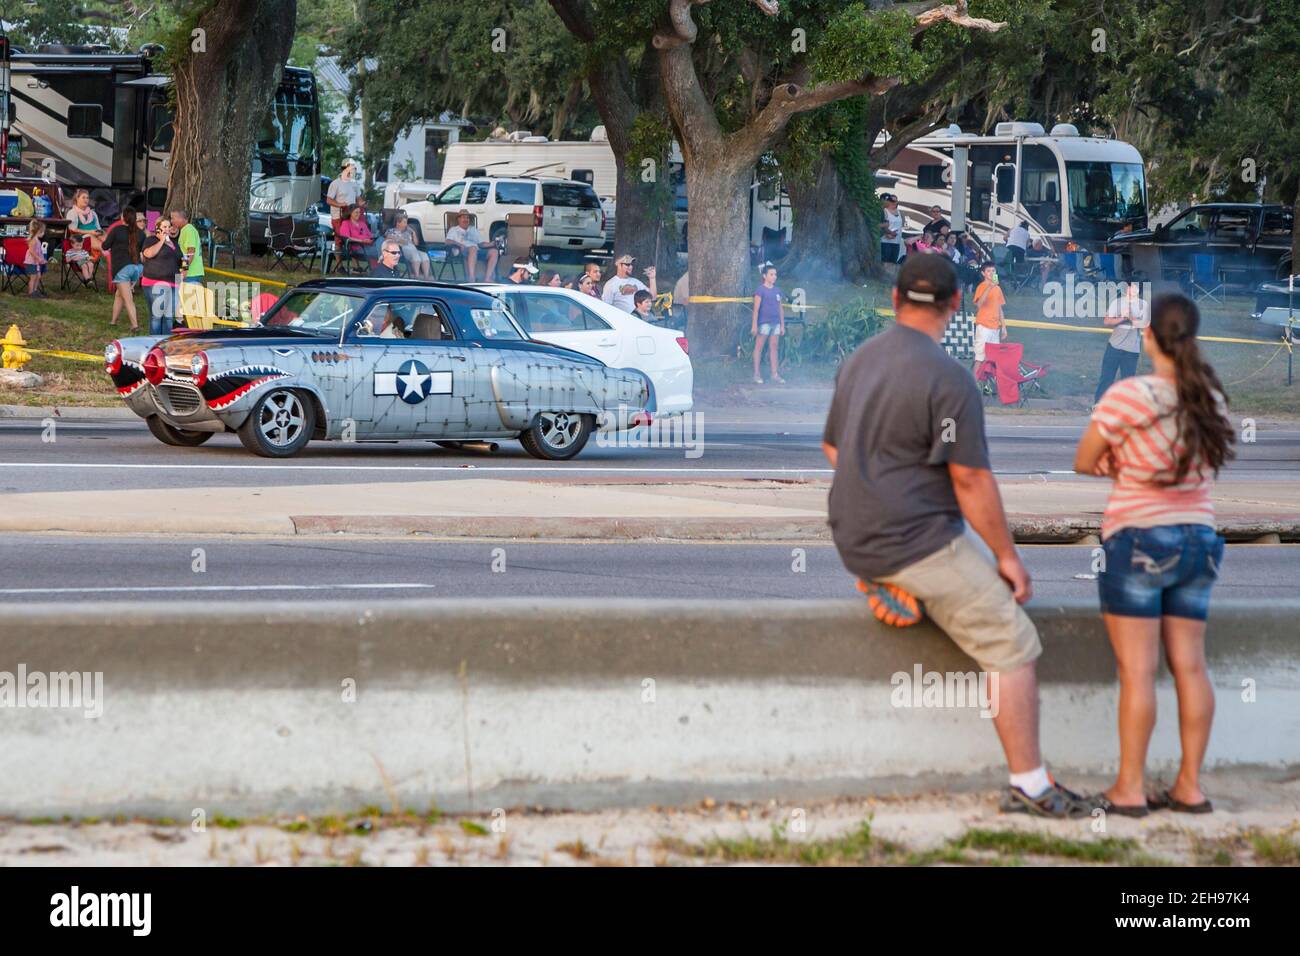 Spectators watch a stream of Classic cars along Highway 90 on the Mississippi Gulf Coast during the annual Cruisin' the Coast event. Stock Photo